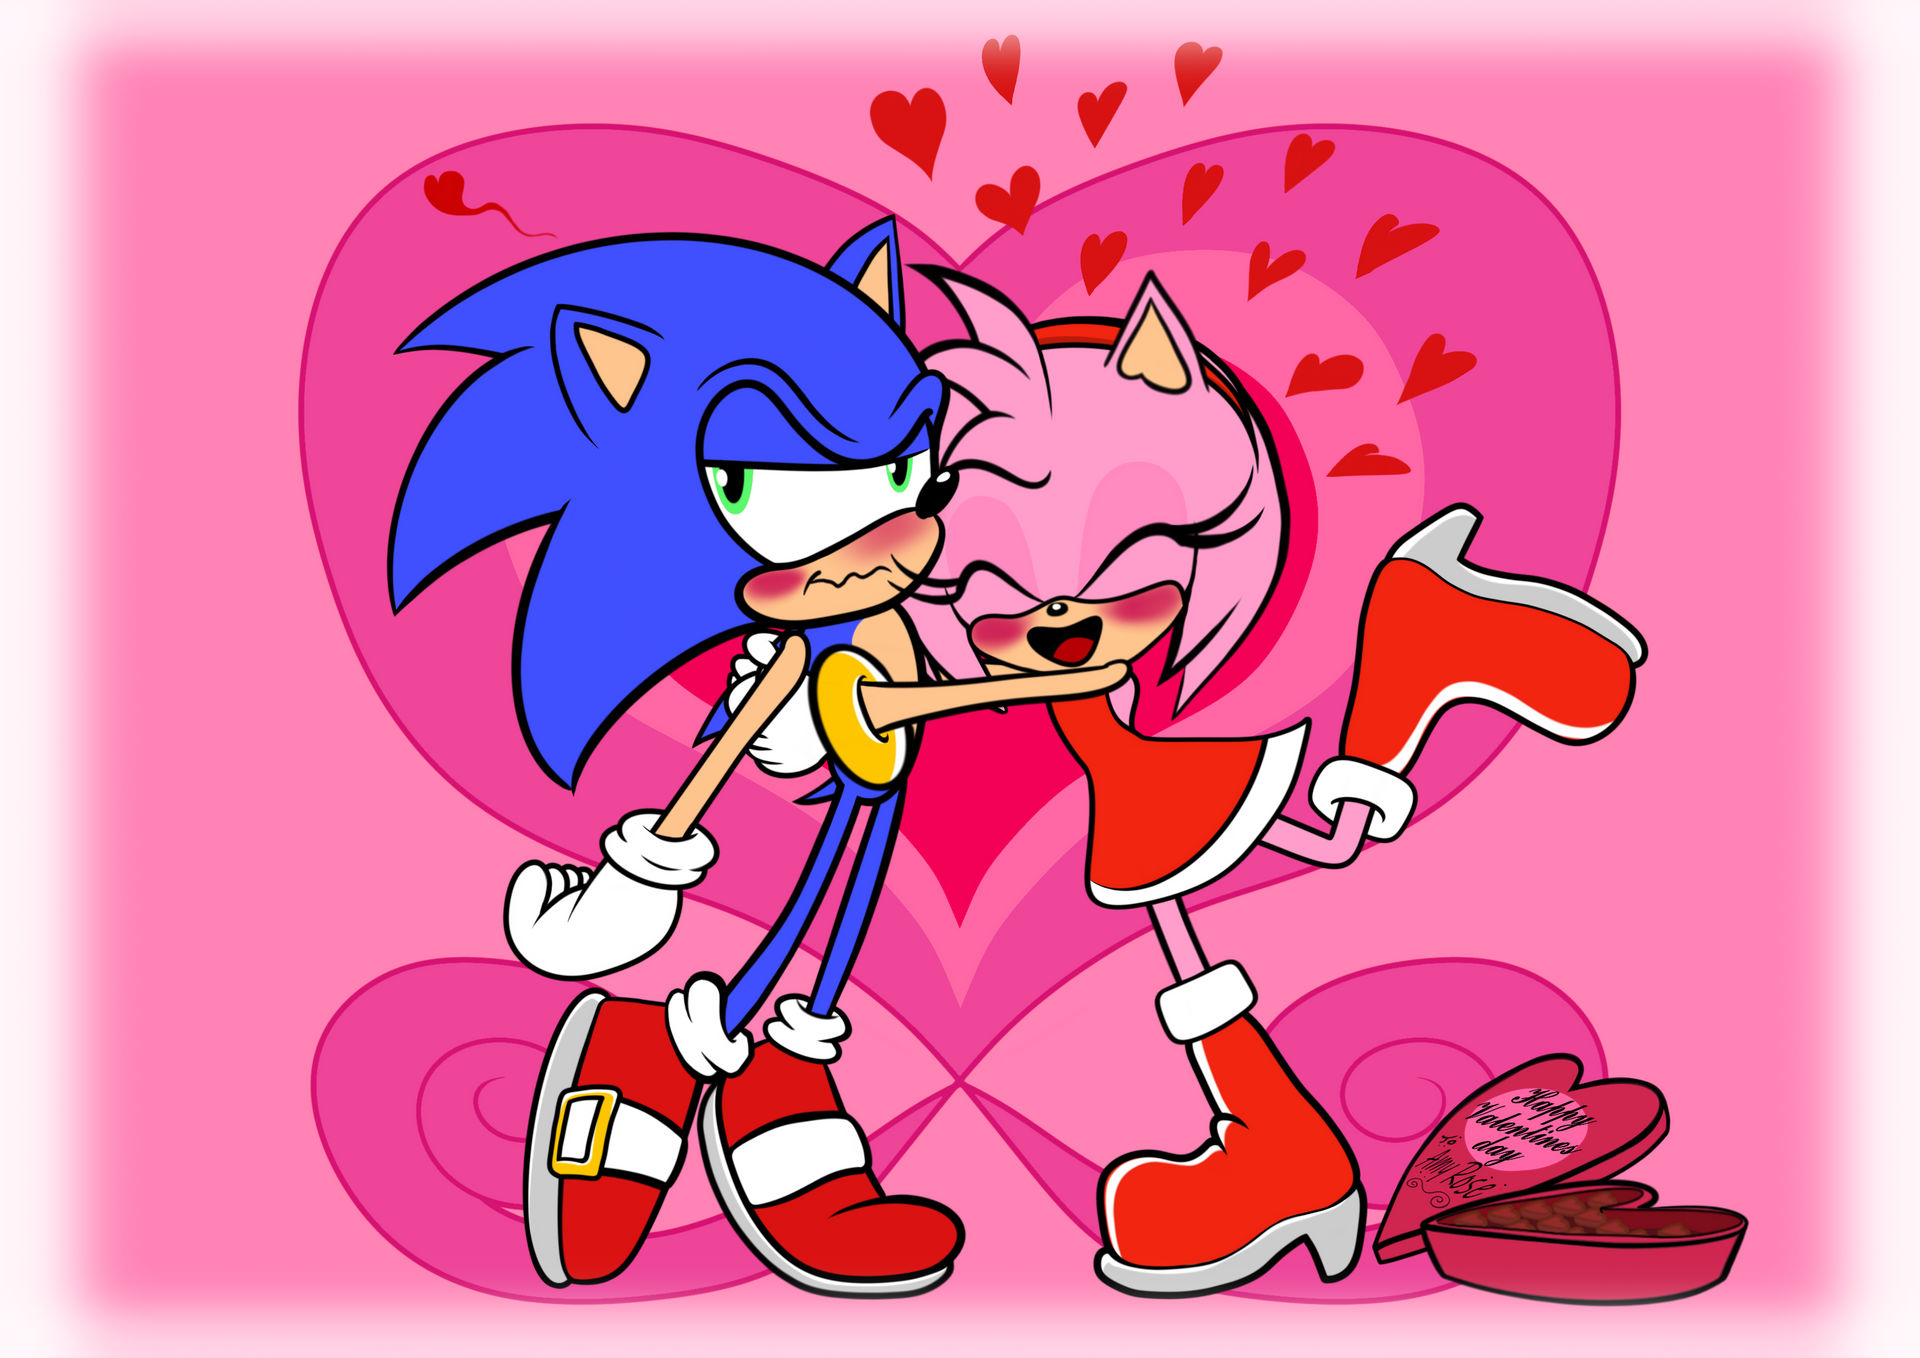 Rita 🌸 on X: Sonic and Amy Rose wishes you a very Happy New Year